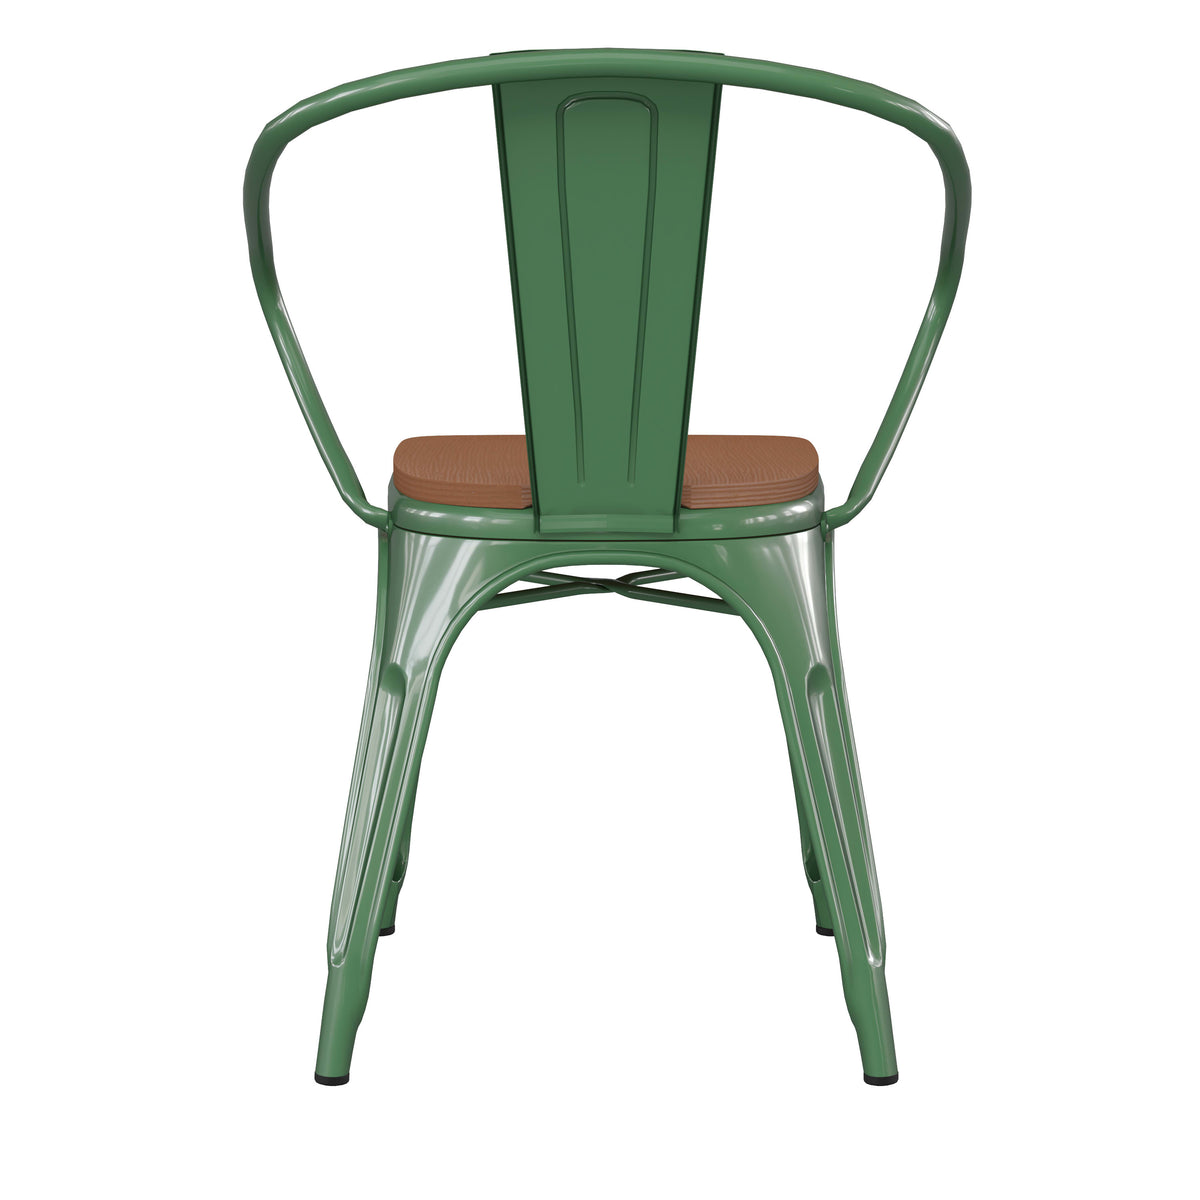 Green/Teak |#| All-Weather Metal Stack Chair with Arms and Poly Resin Seat - Green/Teak